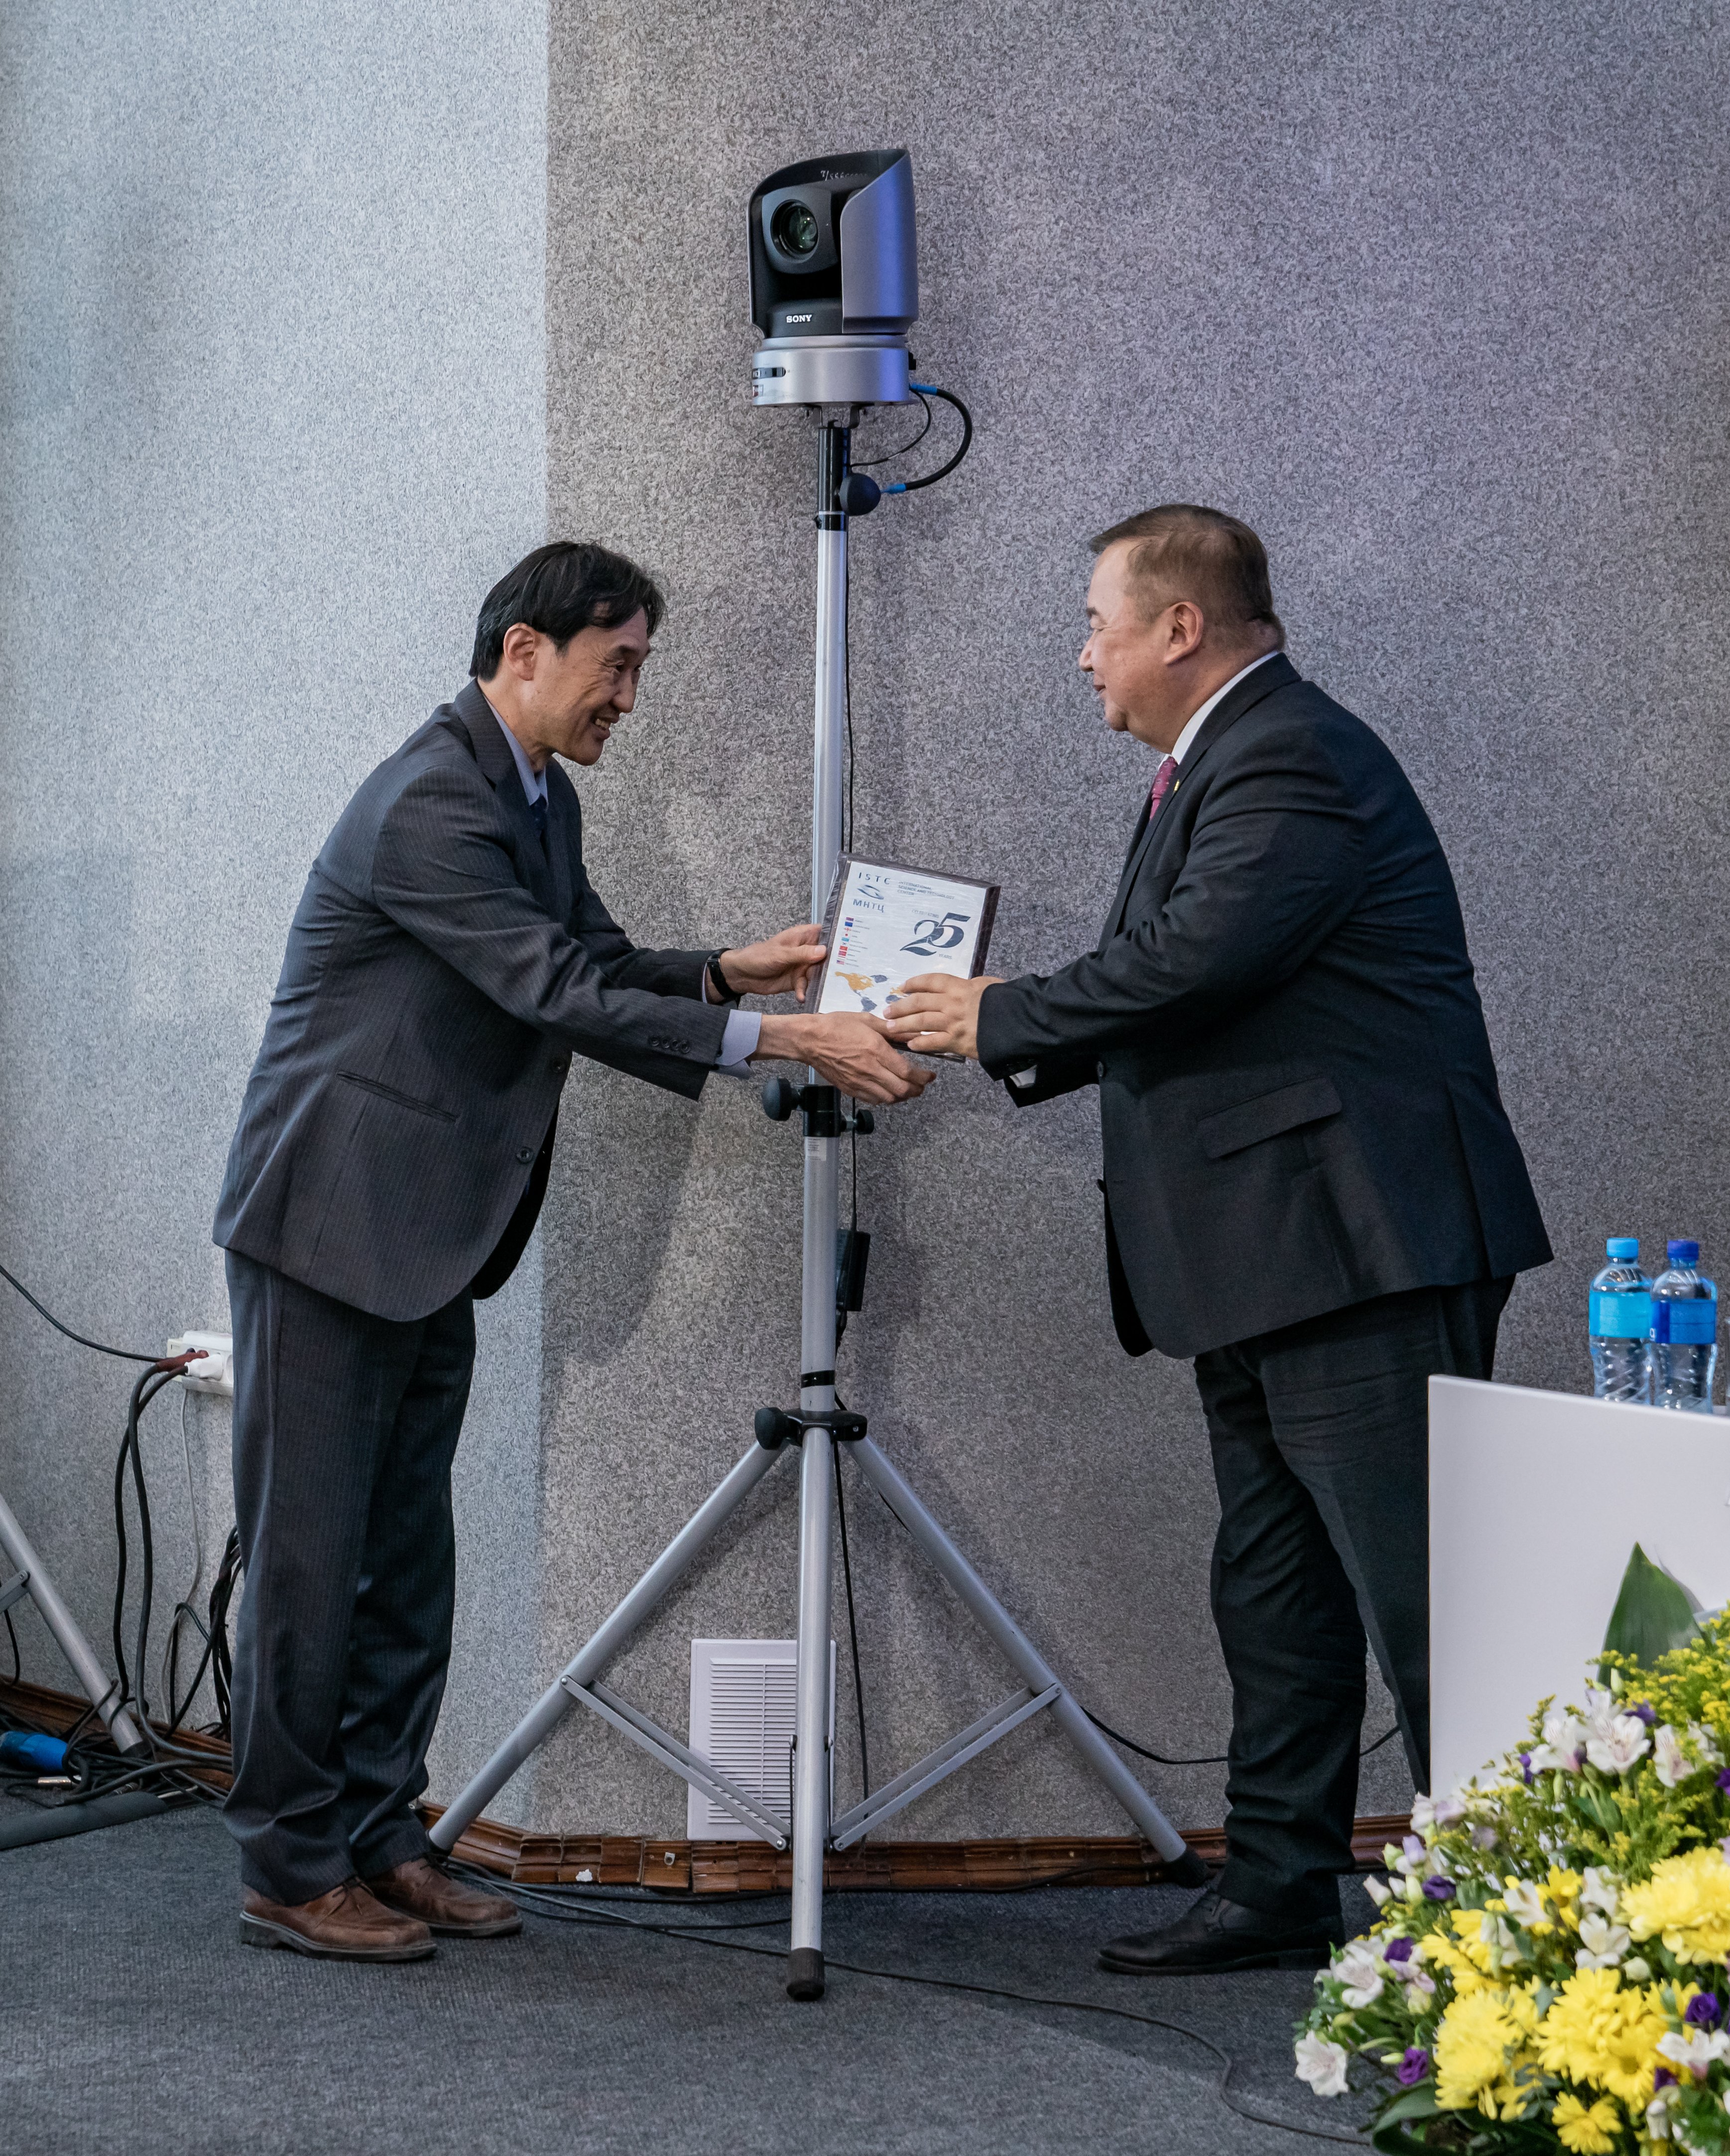 ISTC senior project manager, Takatsugu Mihara participated in the International Workshop, “30th Anniversary of Scientific -Technical Cooperation in Peaceful Use of Atomic Energy” held in the National Nuclear Center (NNC)